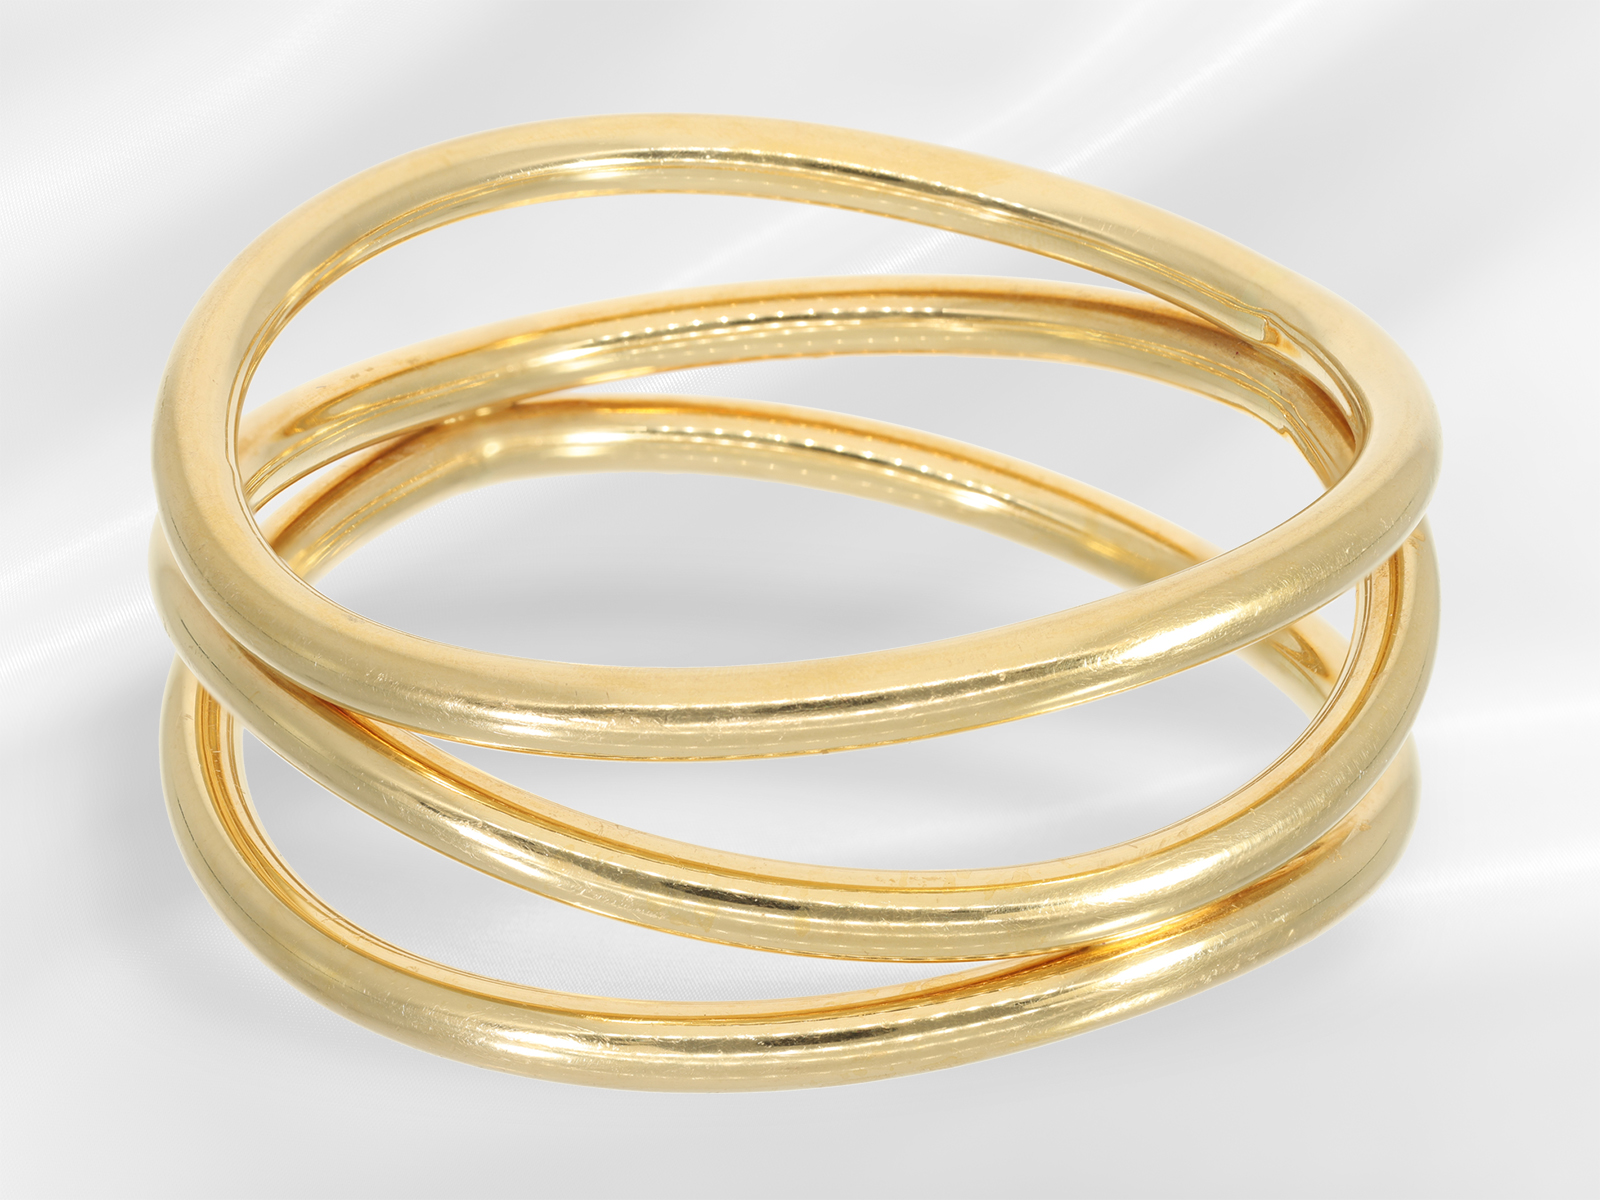 Bangle: noble and very attractive designer goldsmith bangle, Italian handmade from 18K gold - Image 2 of 3